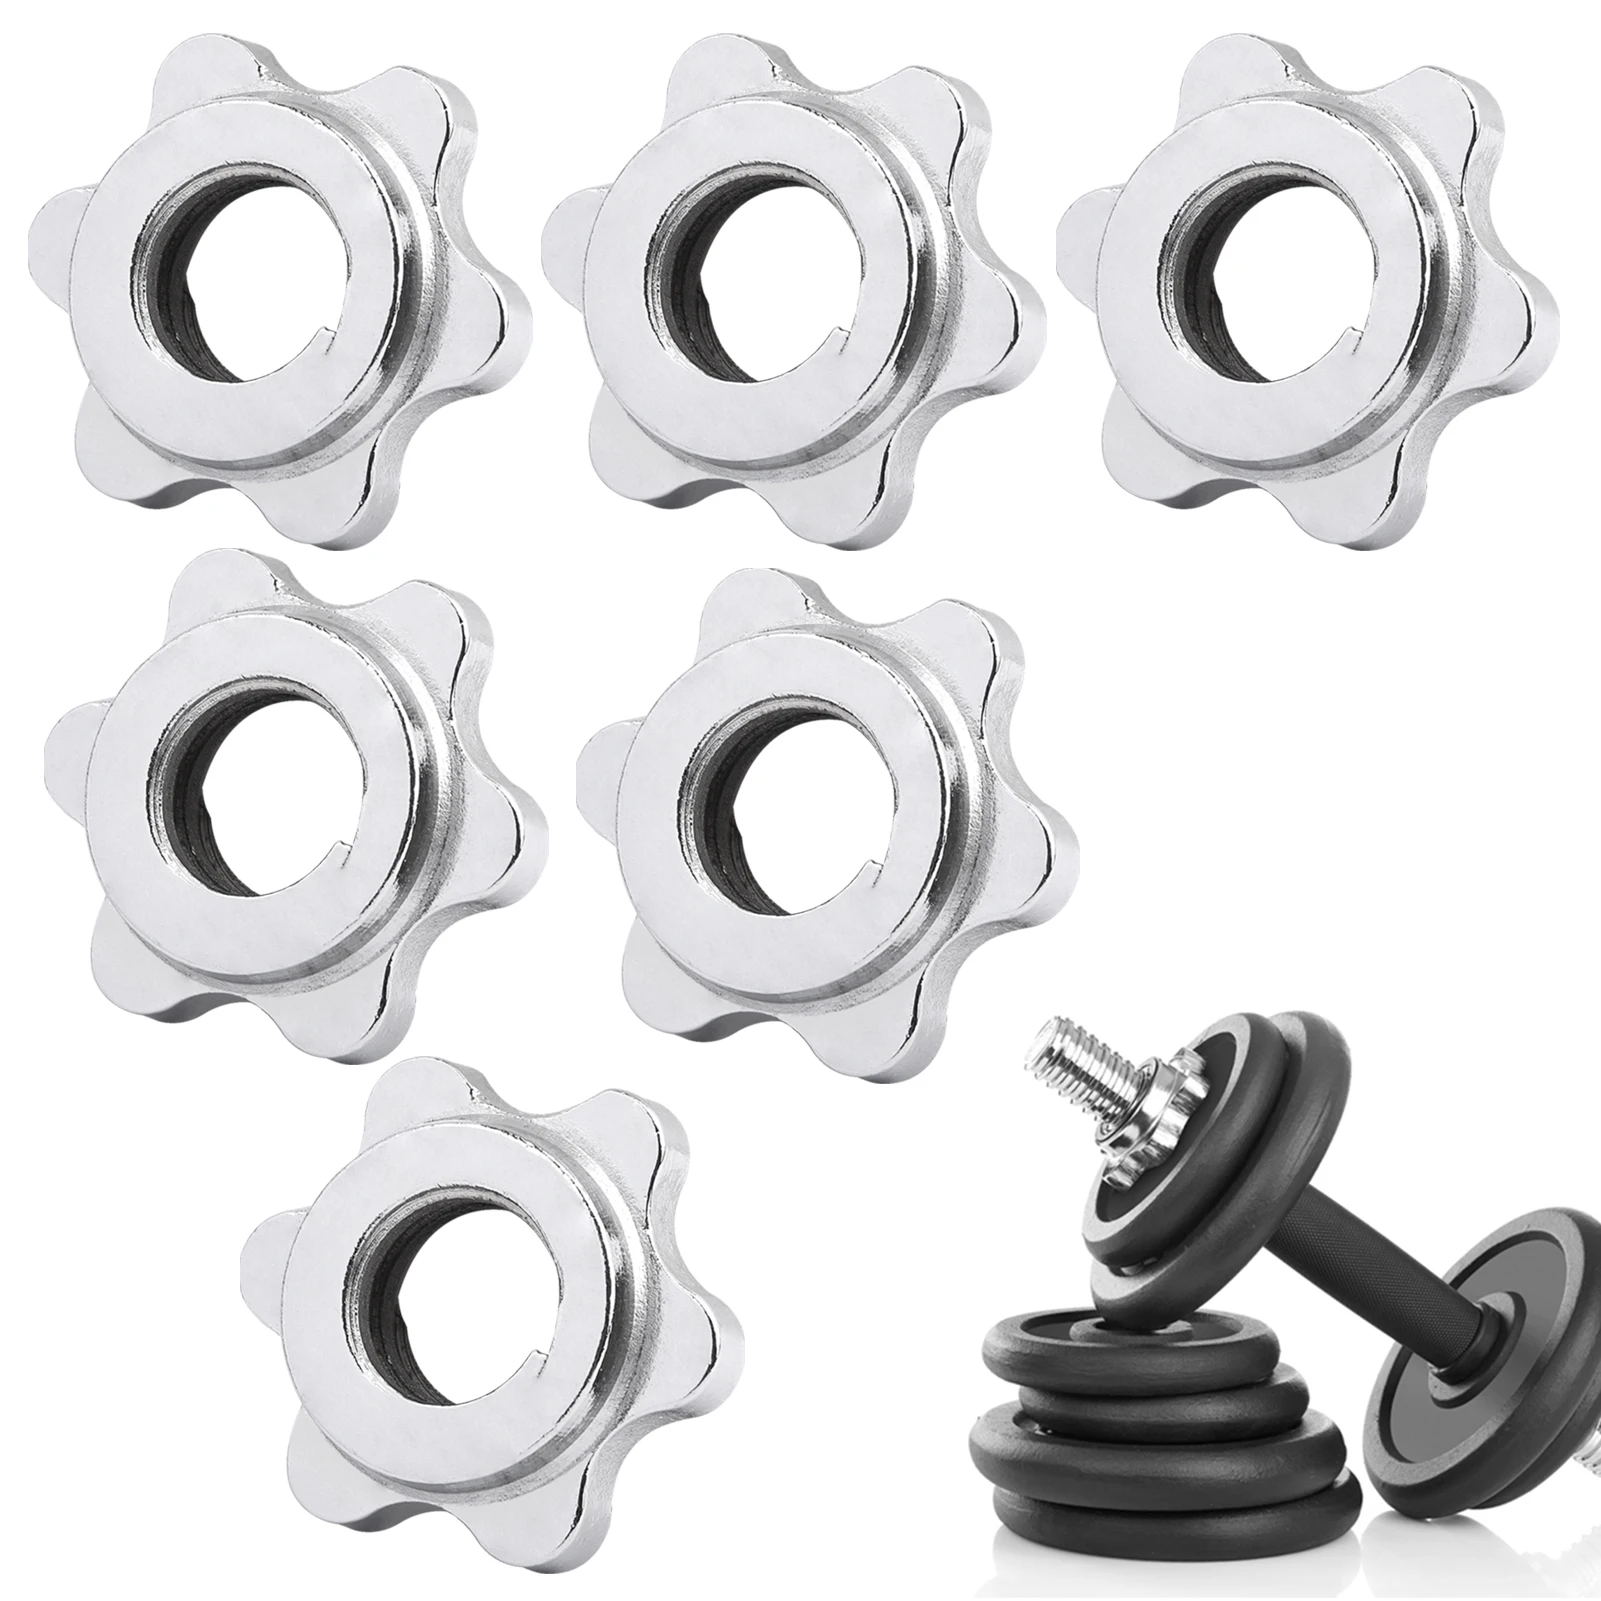 

6pcs 25mm Hex Nut Cap Fixed Spin Lock Collar Anti Slip Safety Fitness Barbell Dumbbell Weight Training Accessories Exercise